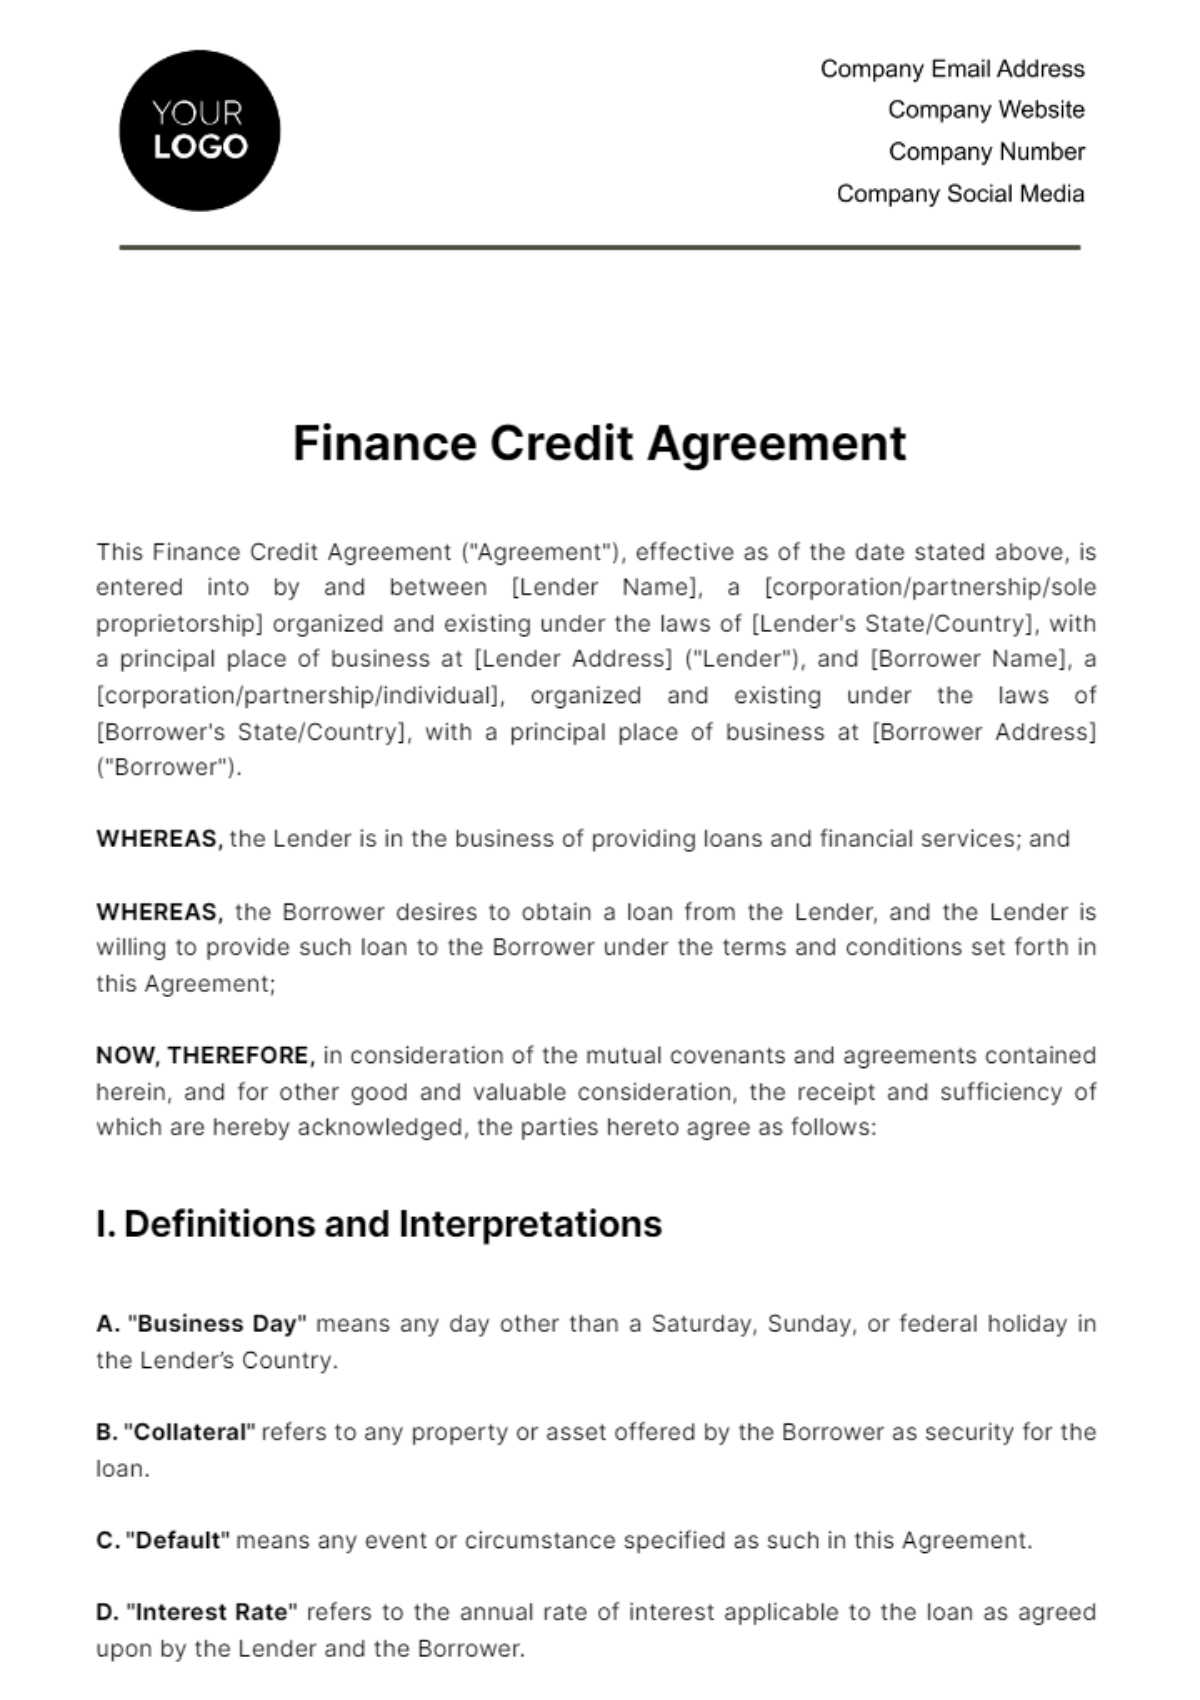 Free Finance Credit Agreement Template